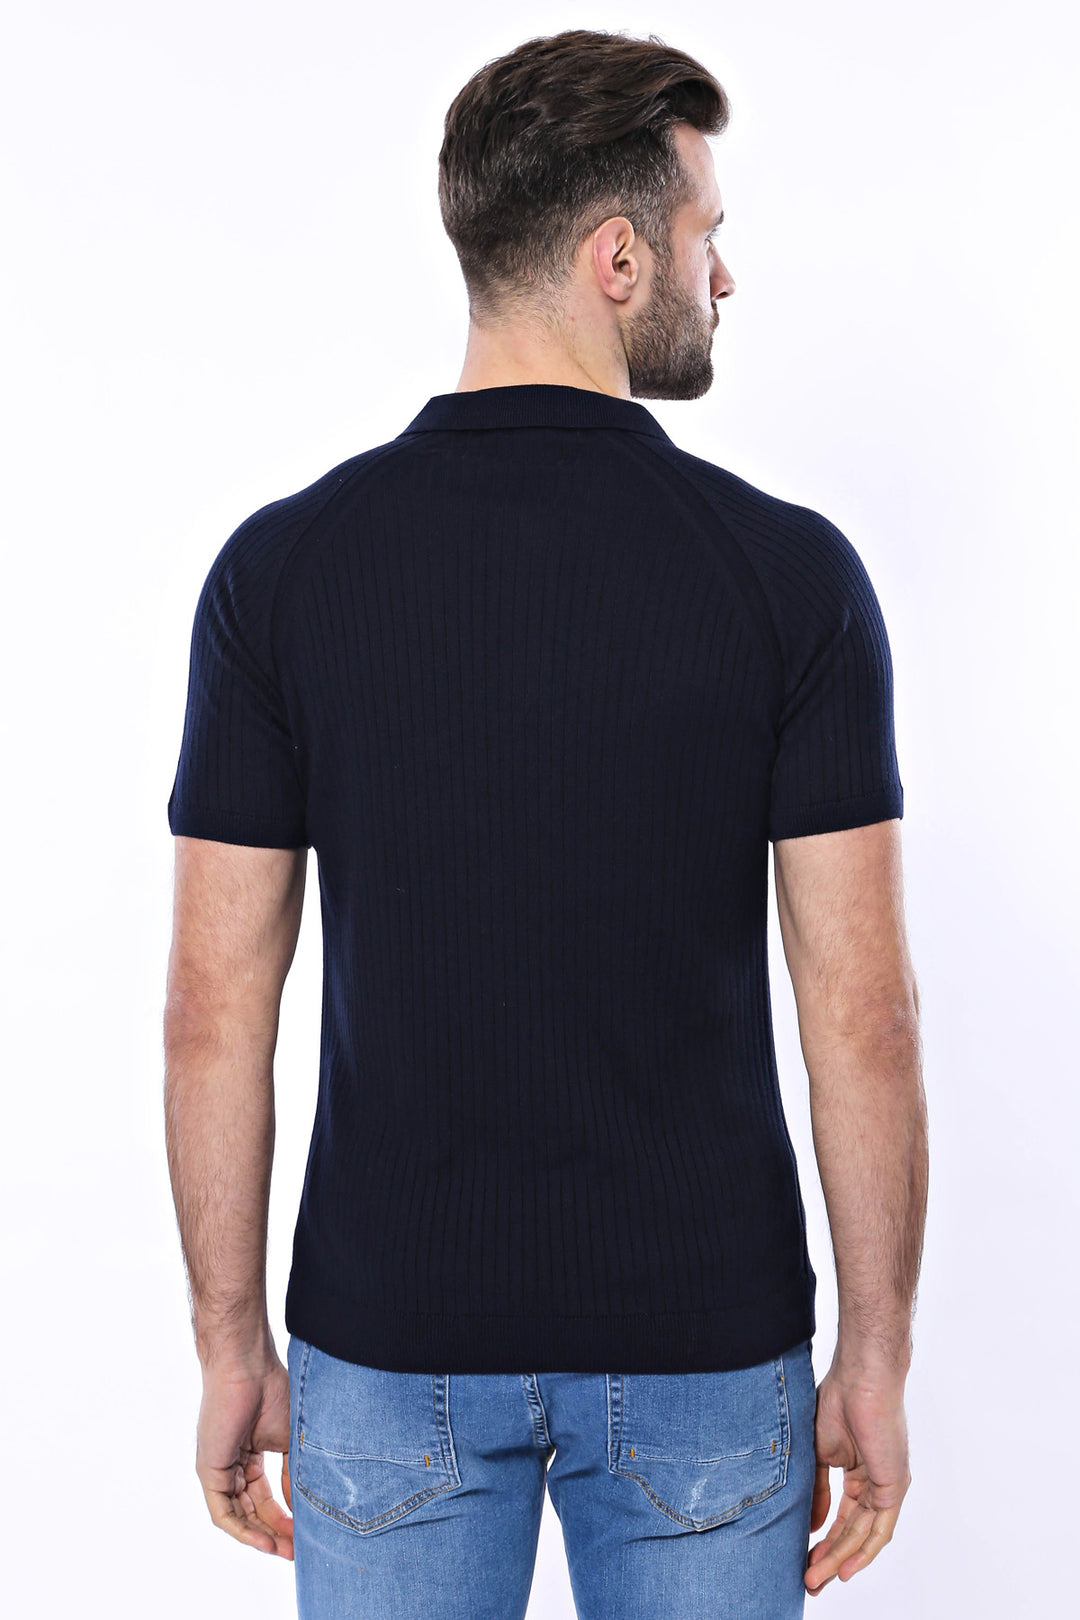 Polo Zippered Patterned Knitted Navy Blue Men T-Shirt - Wessi